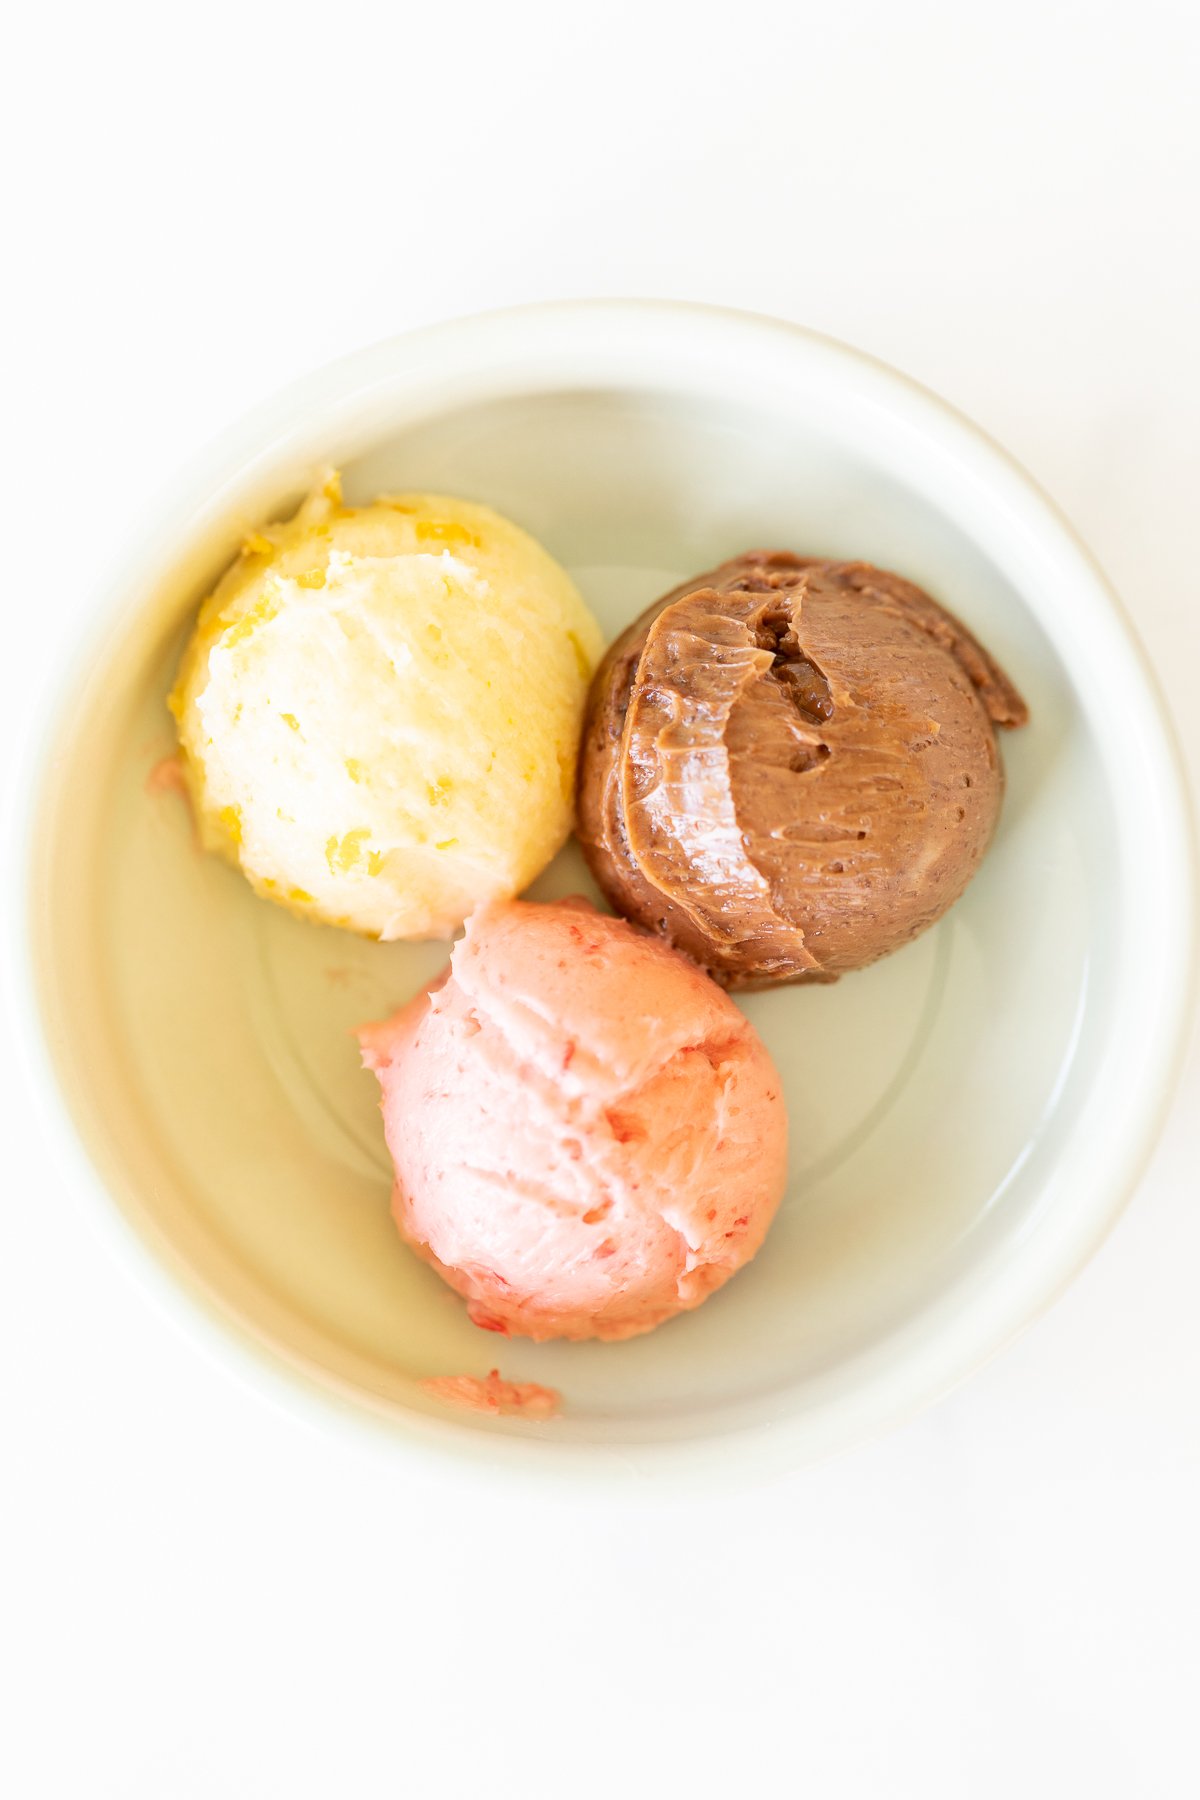 A small white bowl with a scoop of chocolate butter, strawberry butter and orange butter.